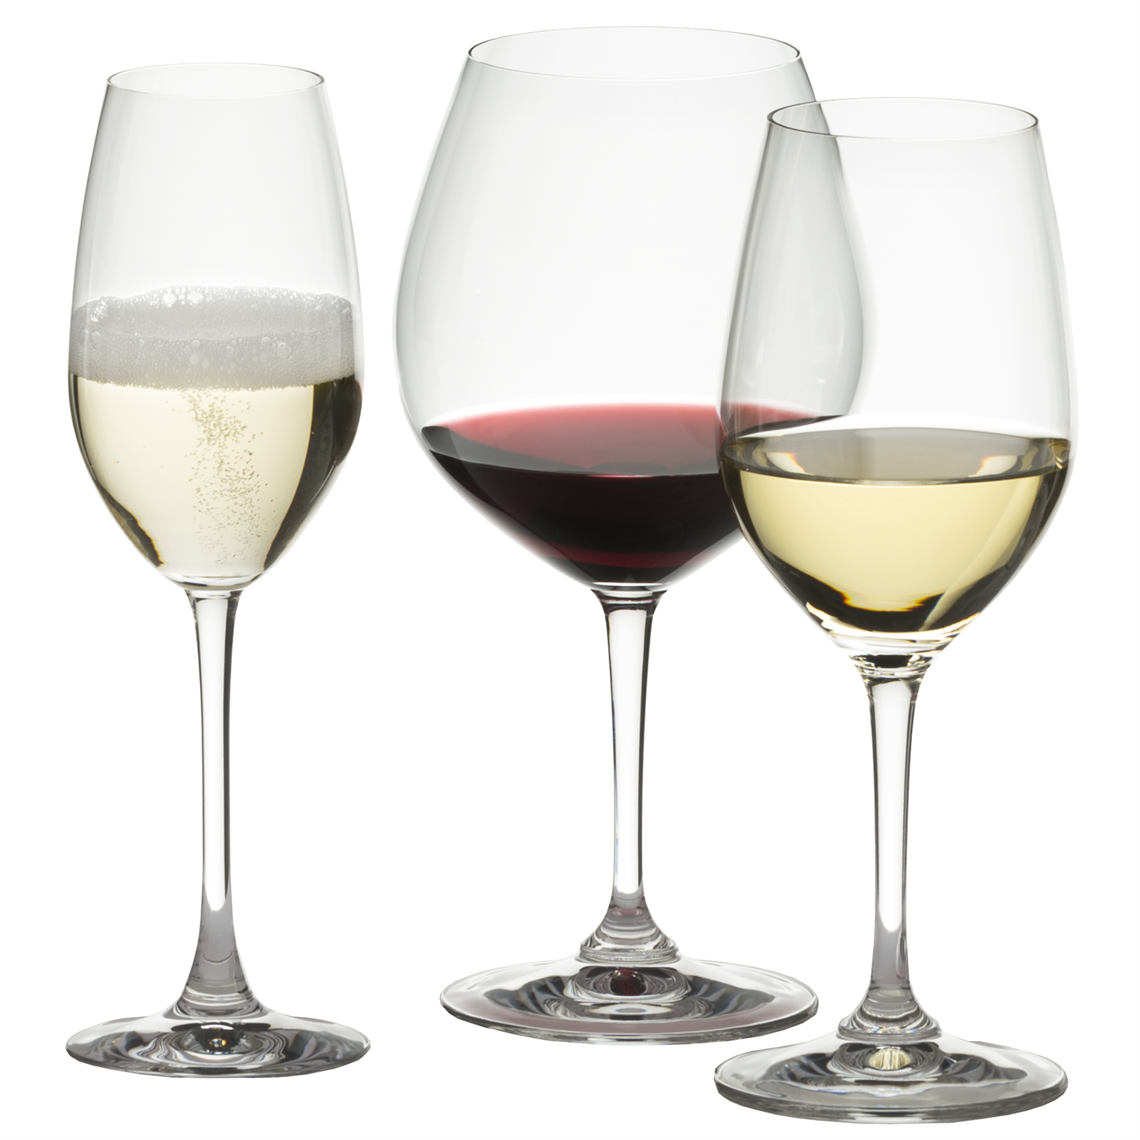 View more water glasses / tumblers from our Restaurant & Trade Glasses range